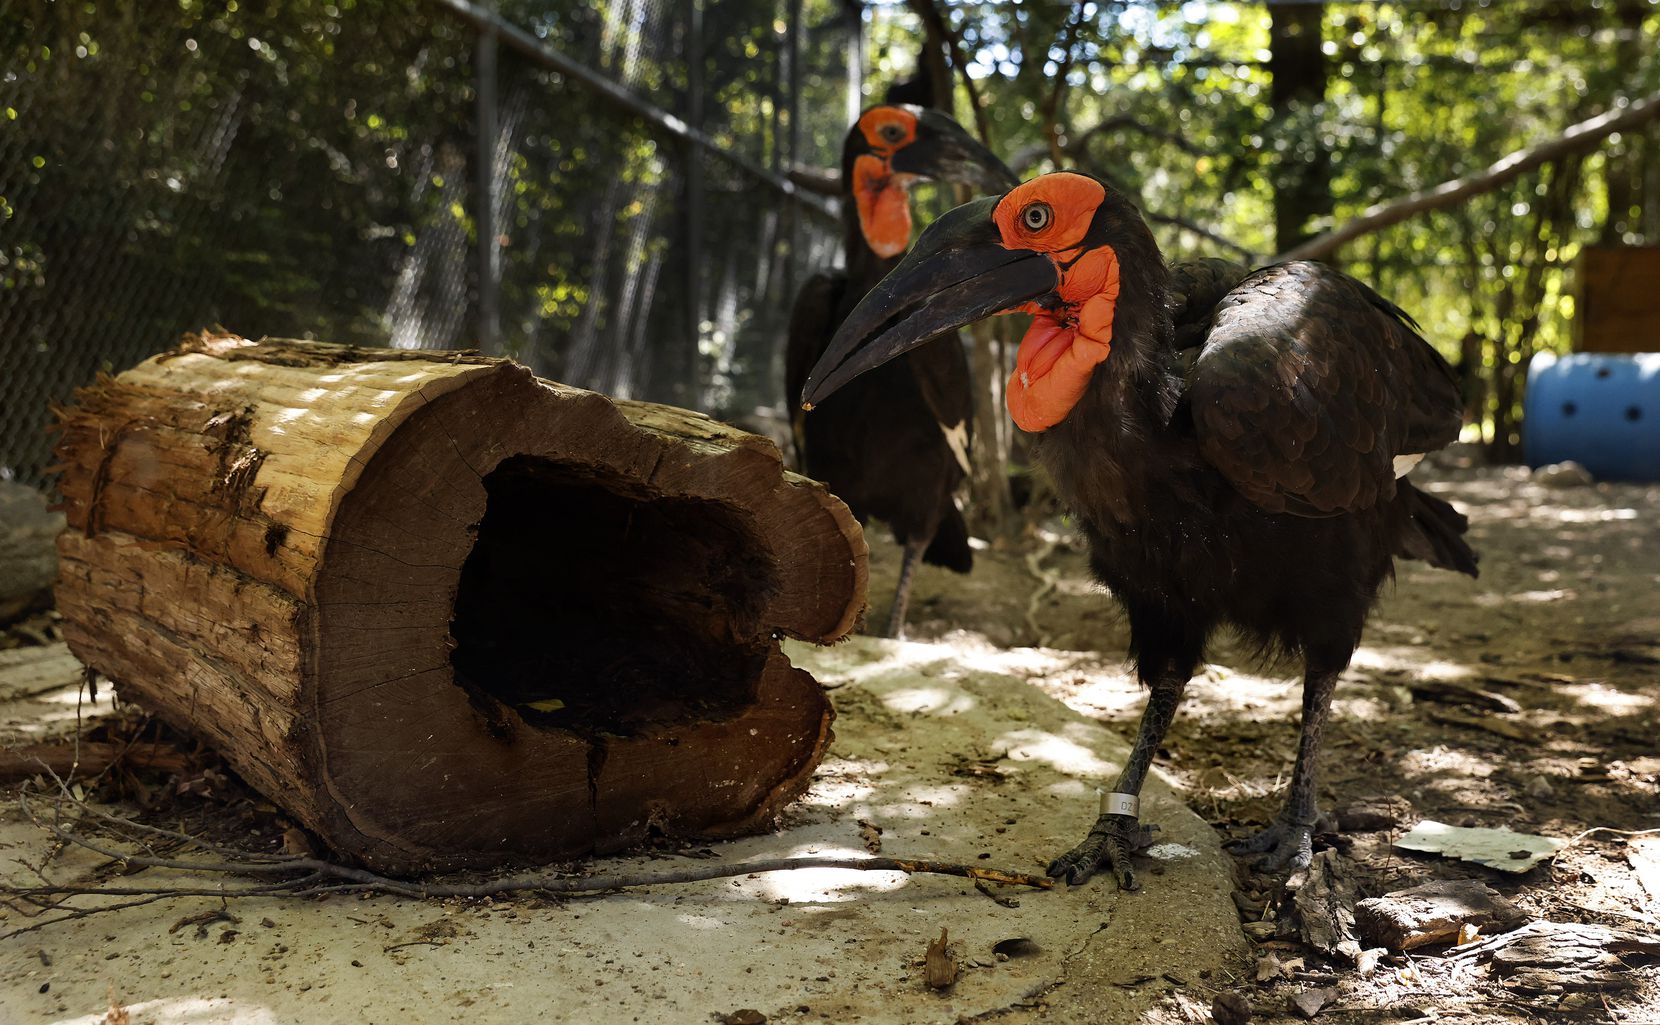 Okpara (right) and Mosi are southern ground hornbills who live with their family group at the Dallas Zoo, Wednesday, September 22, 2021. The zoo has a family of four hornbills, and has raised six chicks behind the scenes since 2017. (Tom Fox/The Dallas Morning News)